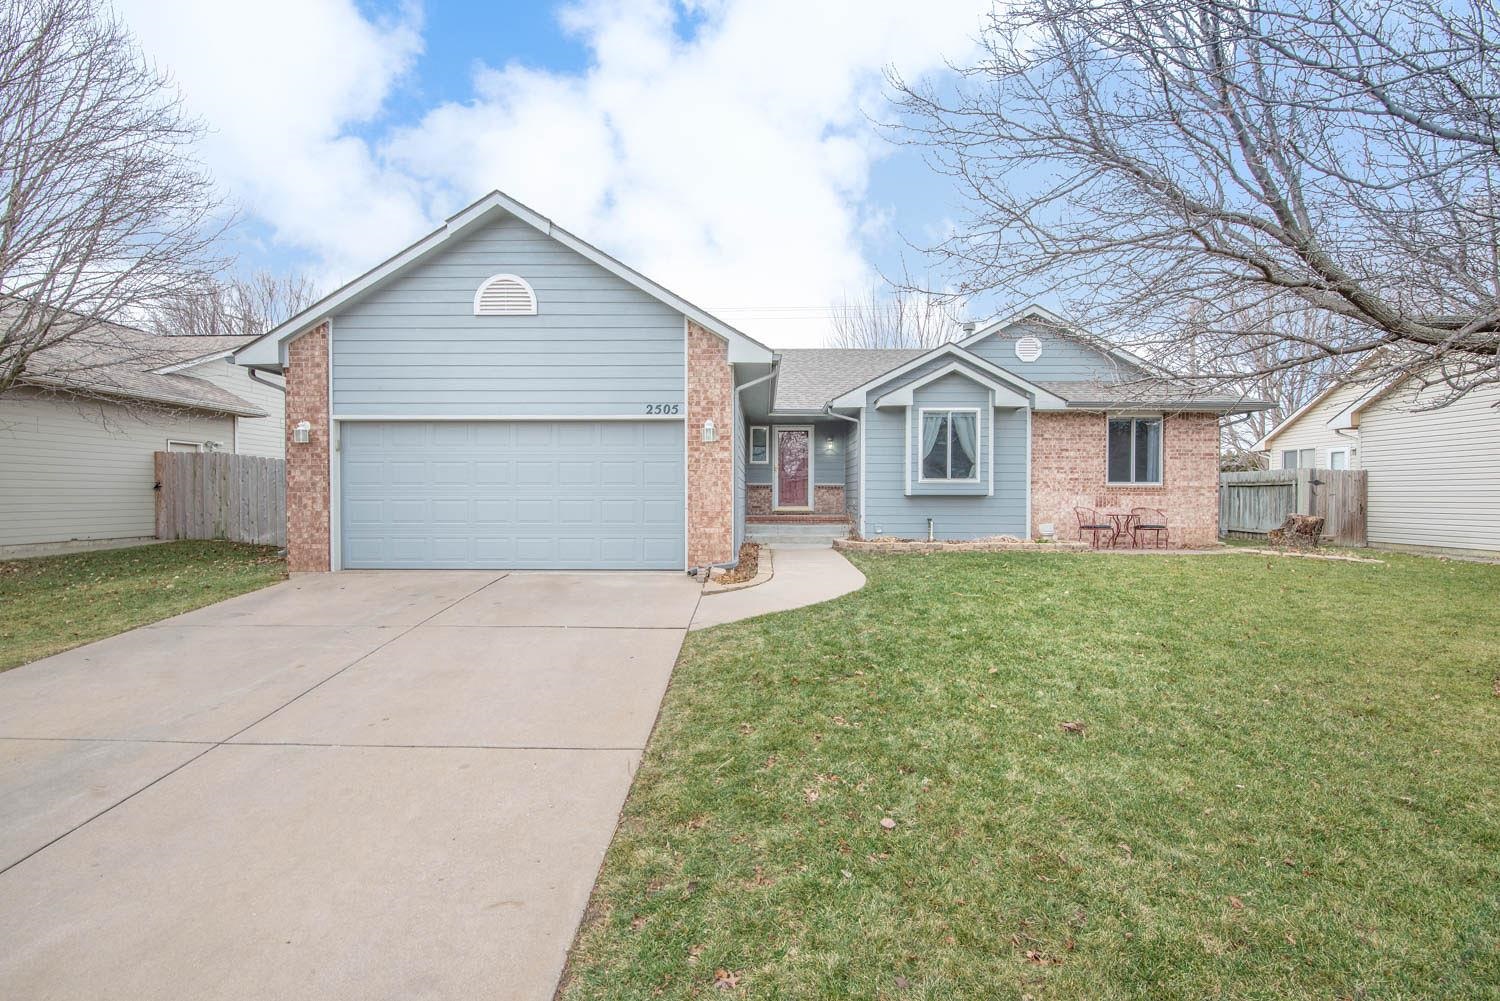 5 BED RANCH HOME IN GODDARD SCHOOLS WITH BONUS ROOM & MAJOR UPGRADES!  WALK INTO A LARGE LIVING AREA